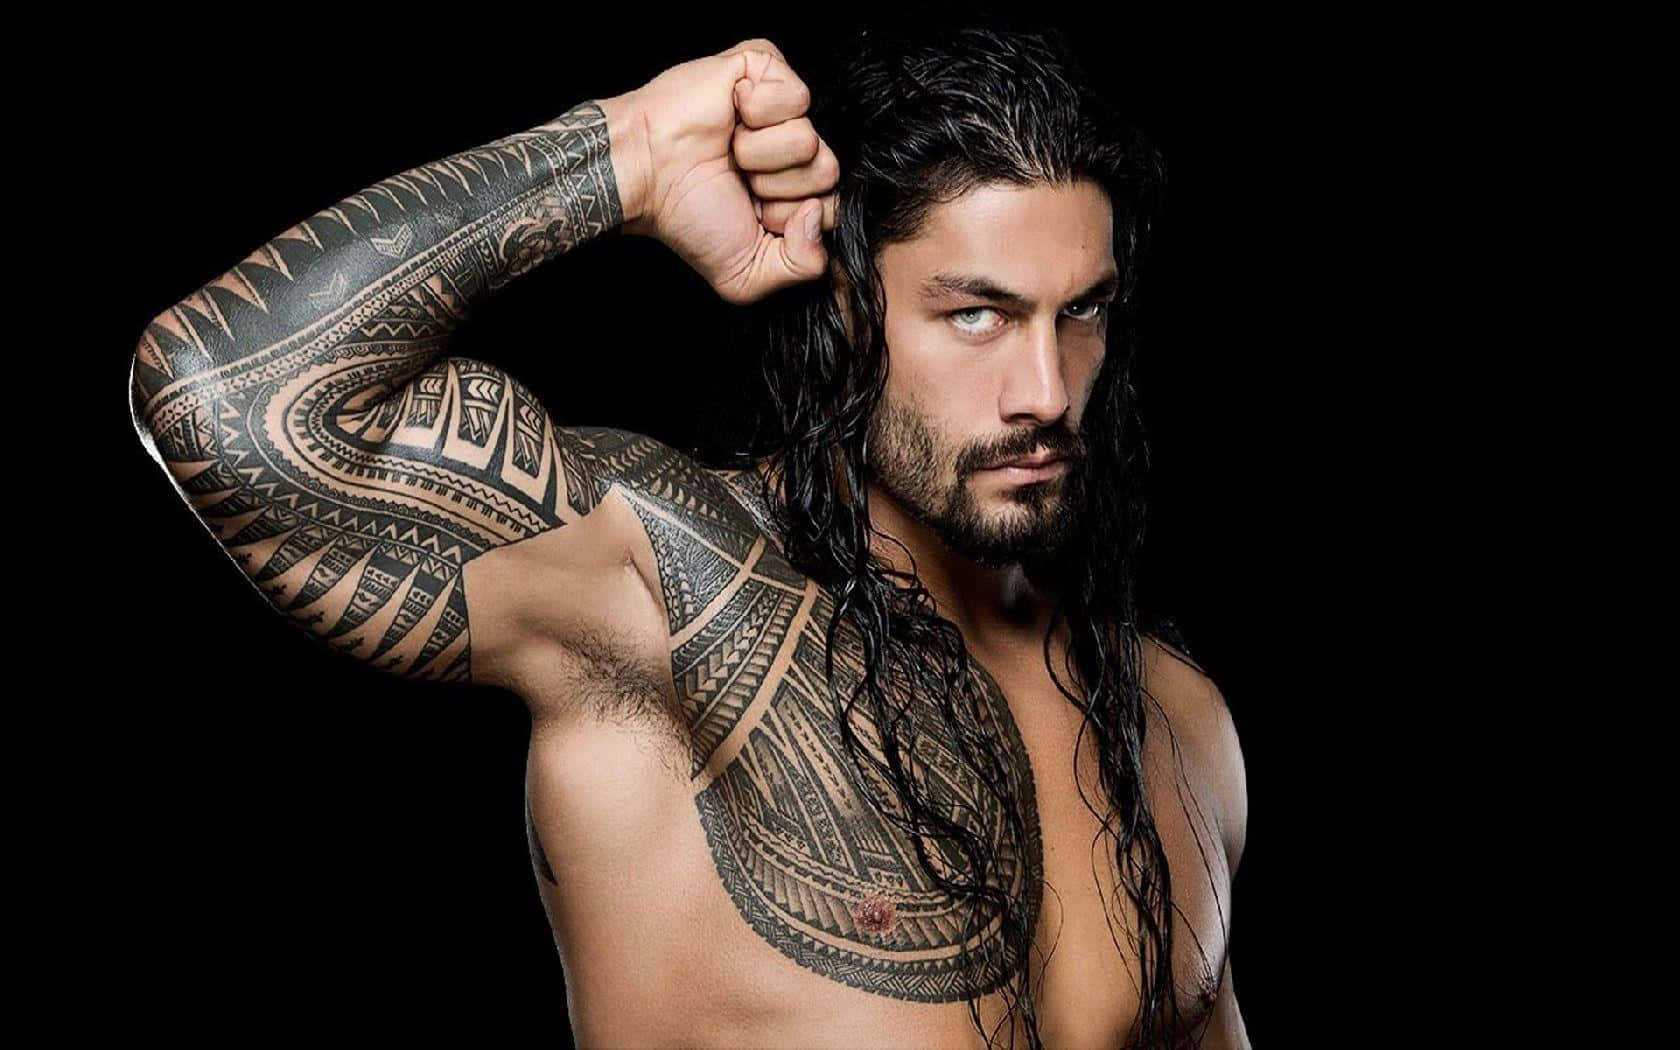 Roman Reigns - I am doing nothing but what is necessary. If someone falls  out of line, I will put them back in it and if someone challenges my  family's position ...